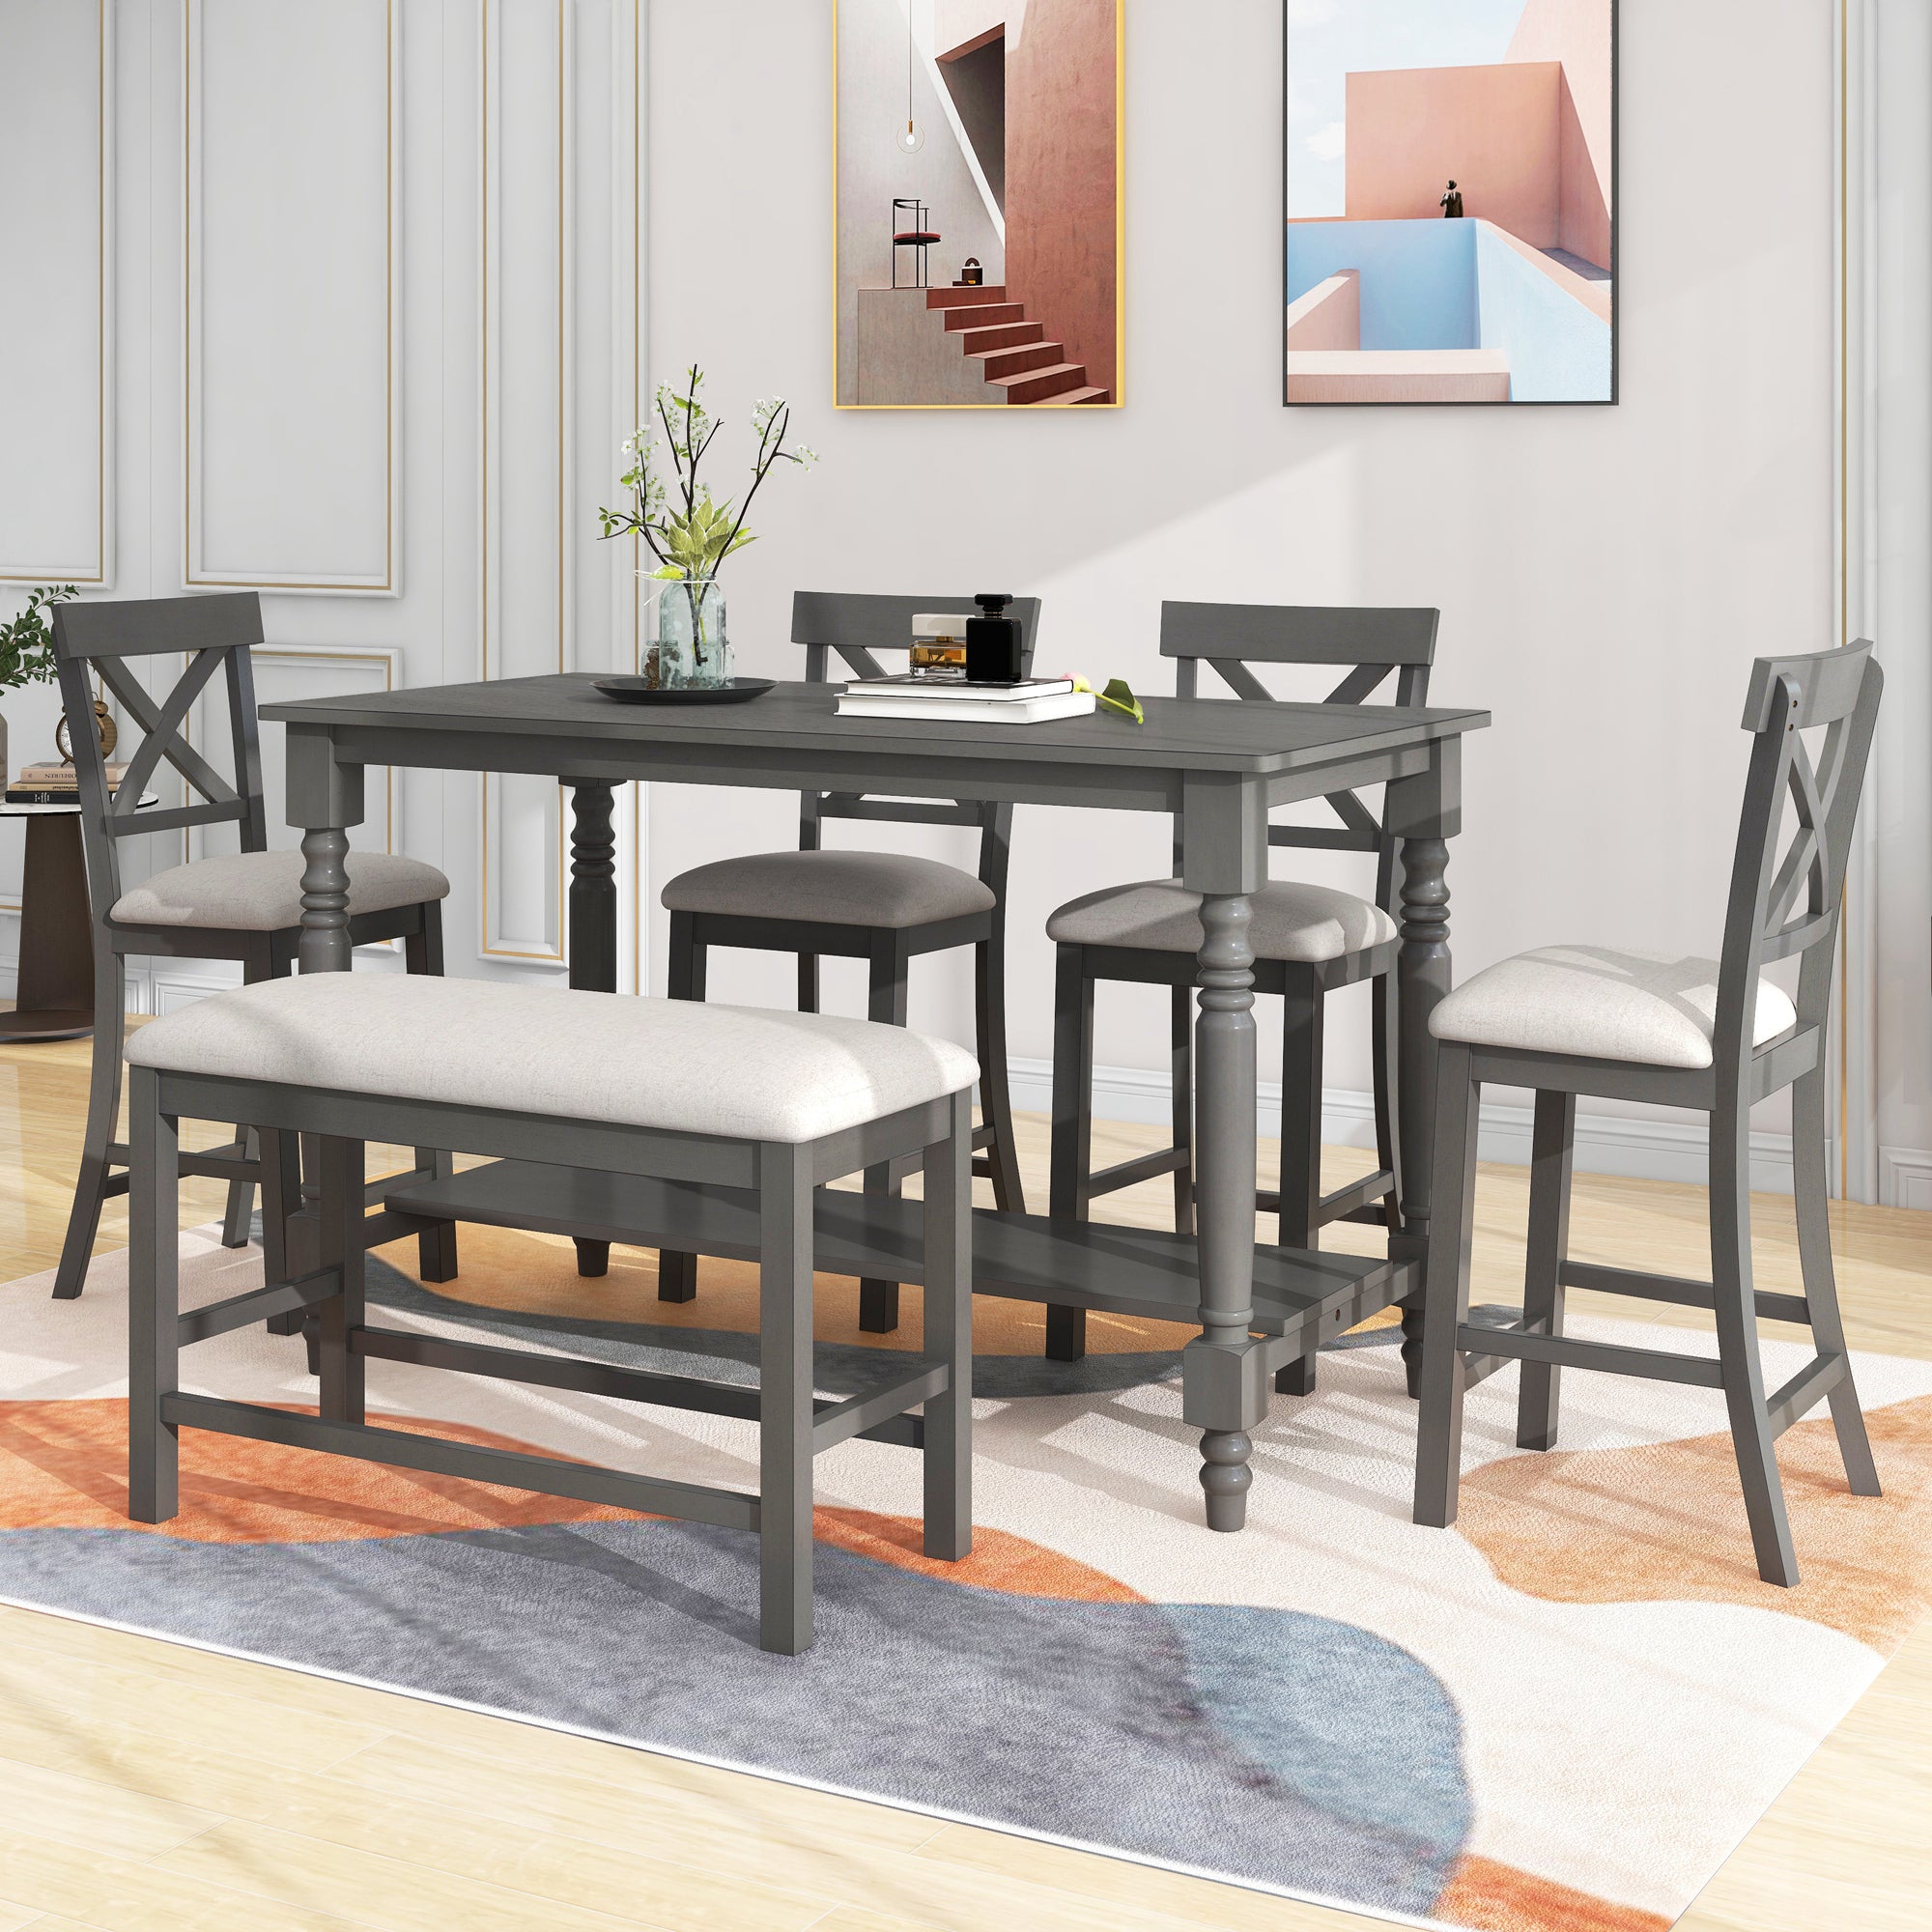 TREXM 6-Piece Counter Height Dining Table Set Table with Shelf 4 Chairs and Bench for Dining Room (Gray)